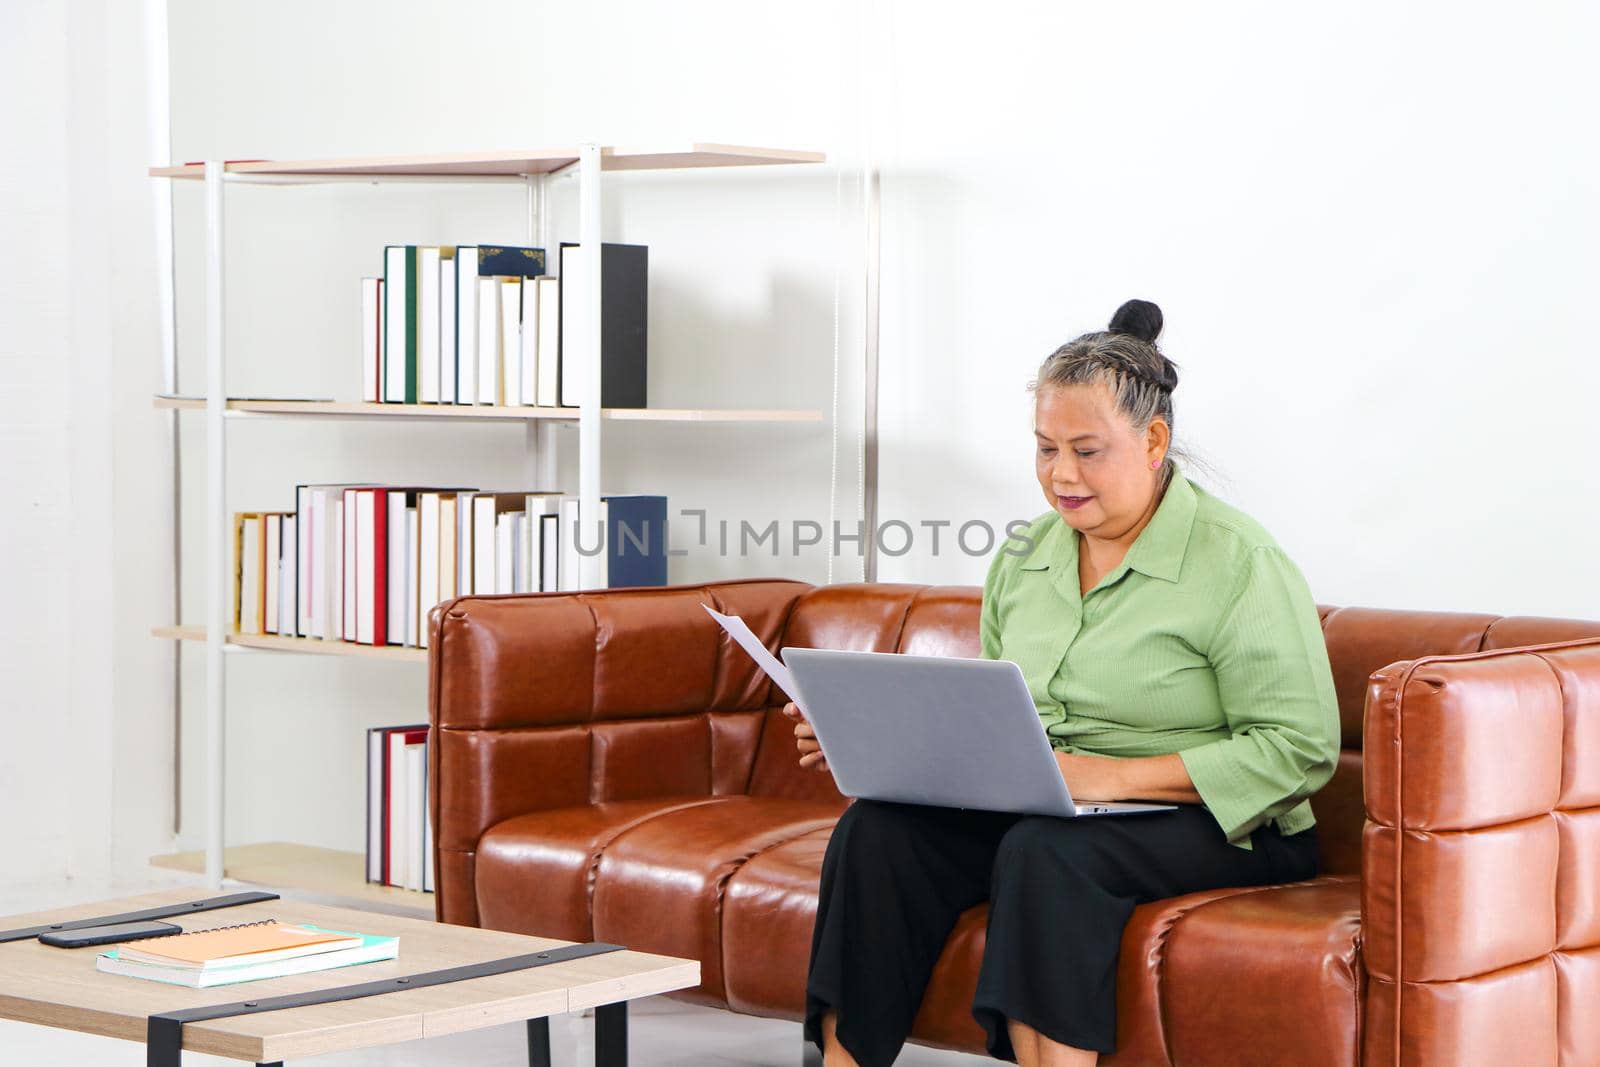 Asian women Retirement Use a smartphone and laptop in the living room concept to work at home. Quarantine to prevent spreading disease Or a conversation with someone far away Via the Internet